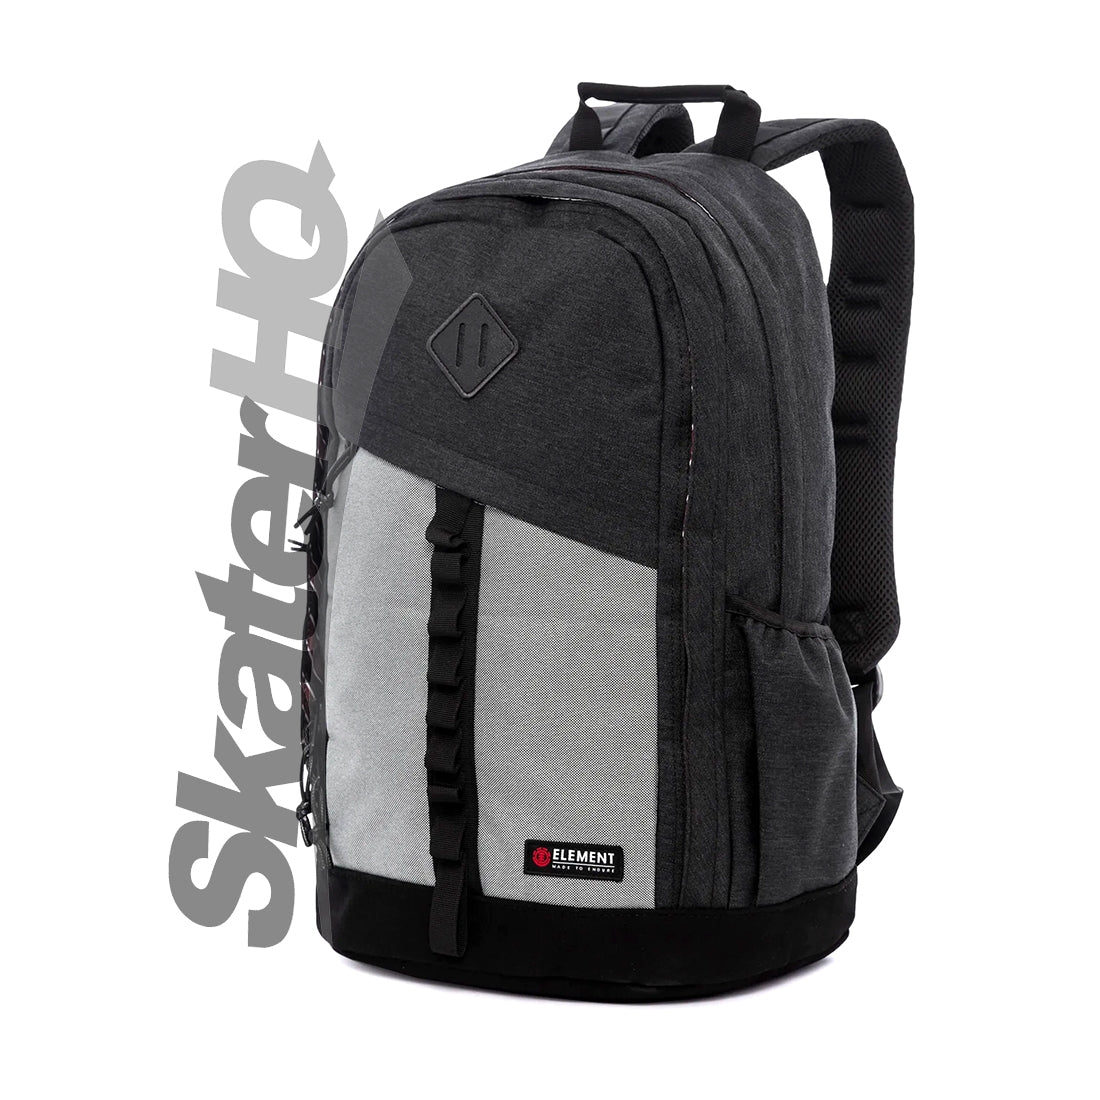 Element Cypress Backpack - Black Heather Bags and Backpacks